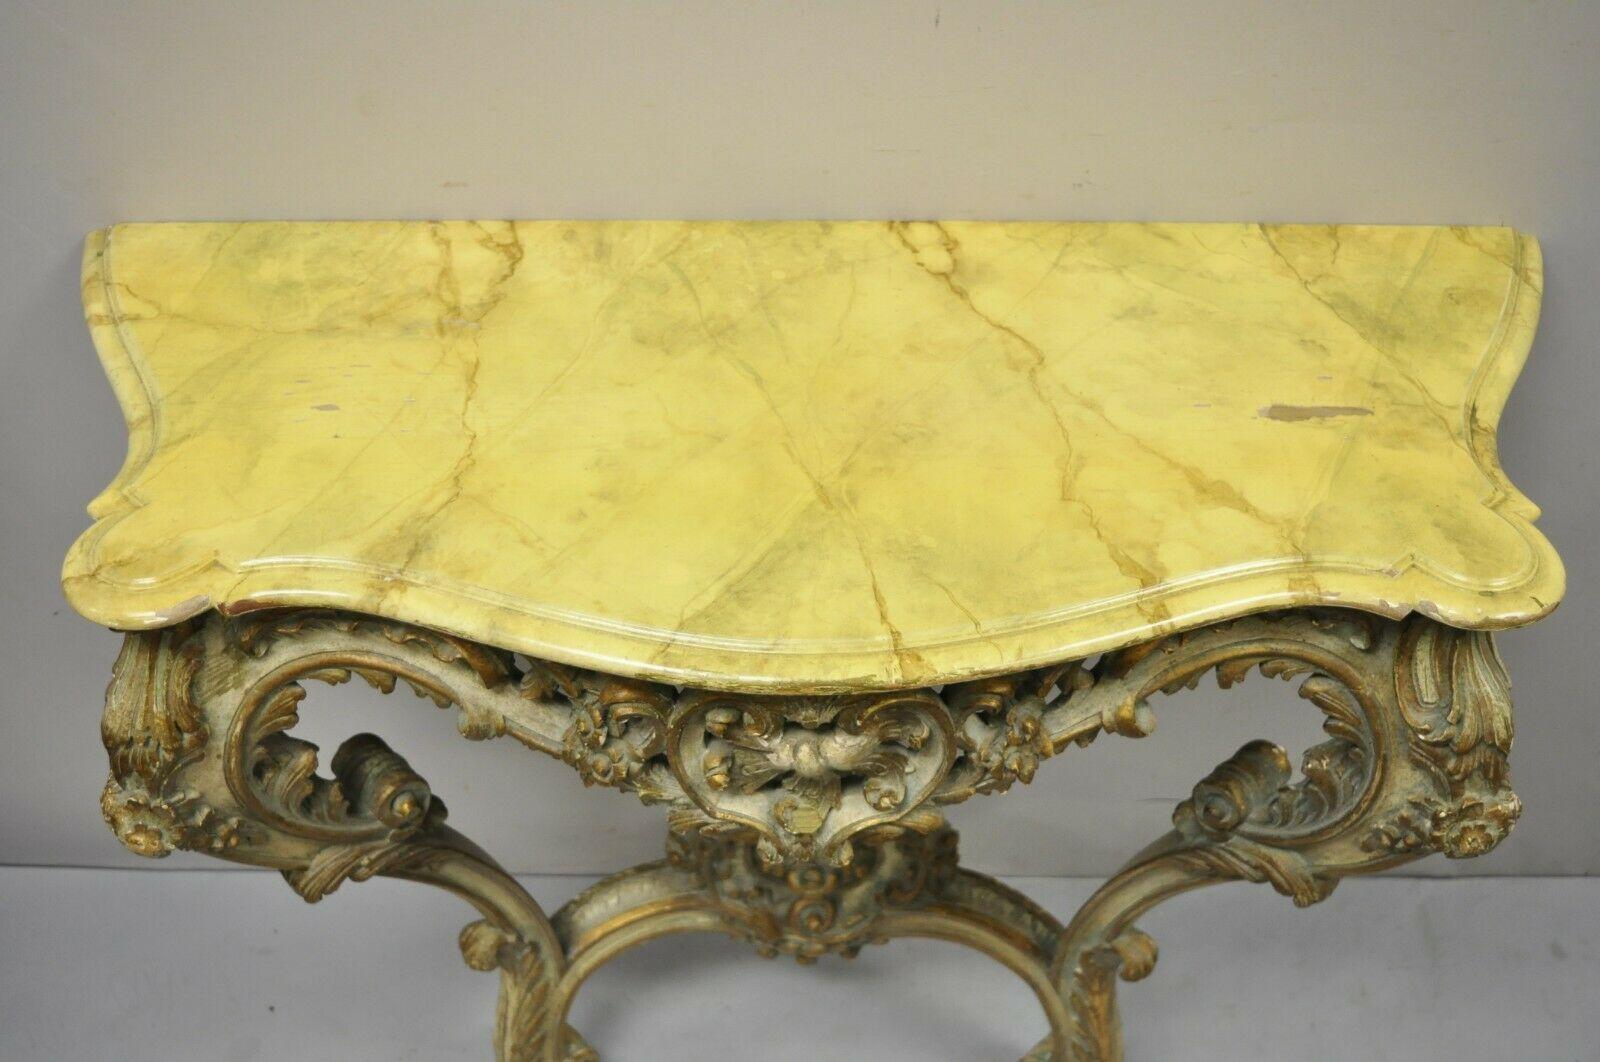 Antique Italian Rococo Carved Giltwood Wall Mount Console Hall Table. Item features a finely carved giltwood base, shapely wooden top with cream lacquer finish, very nice antique item, quality Italian craftsmanship, great style and form, does not